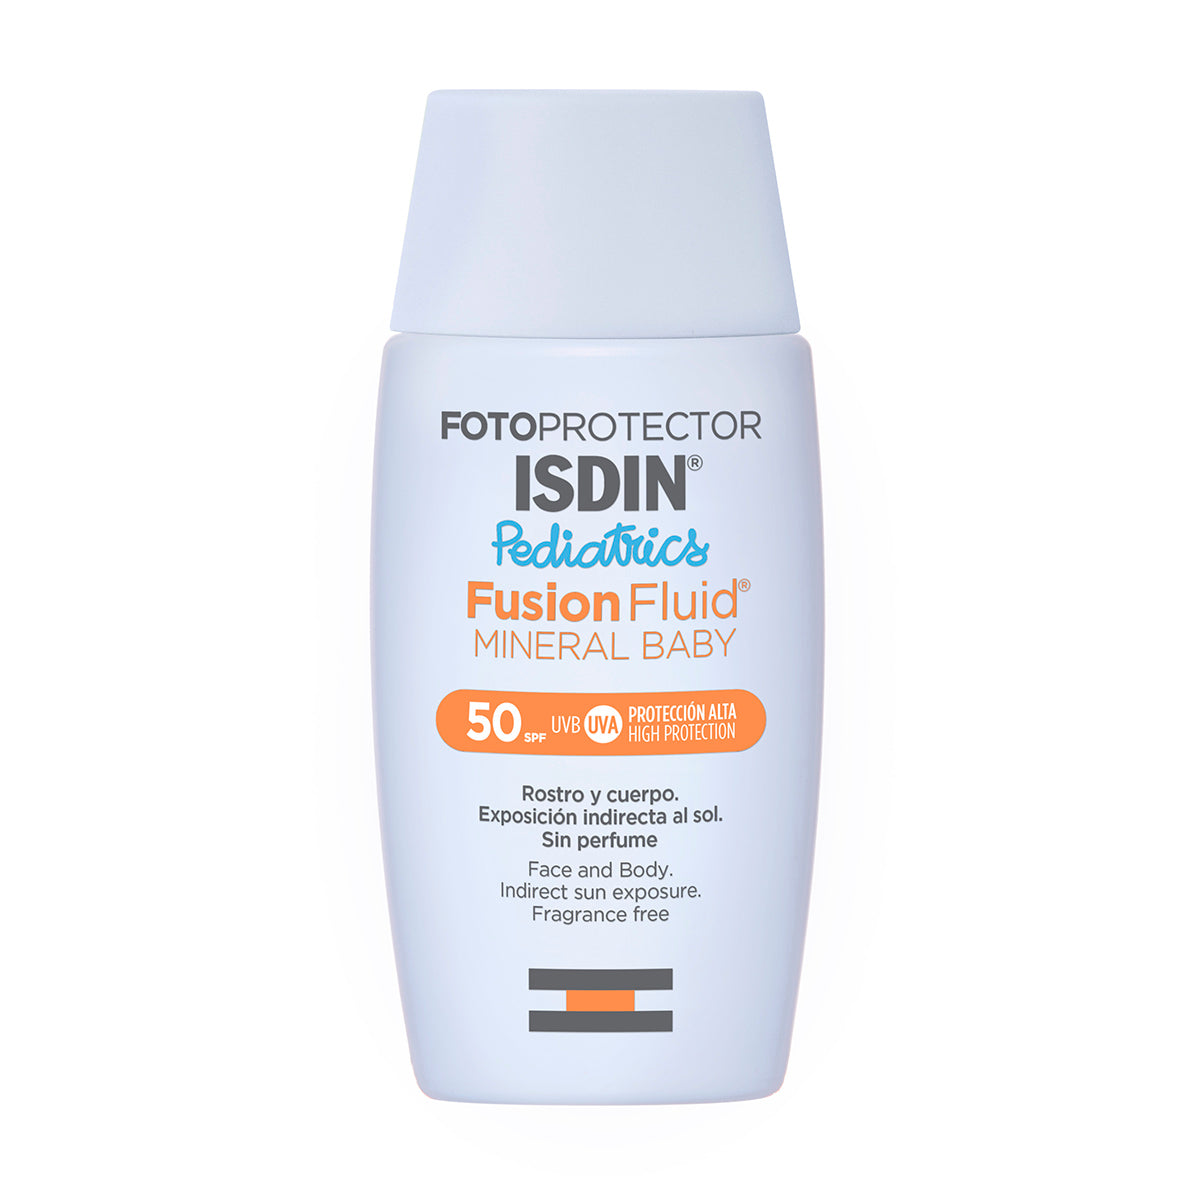 Isdin Fotoprotector isdin 50SPF mineral baby ped 50ml.